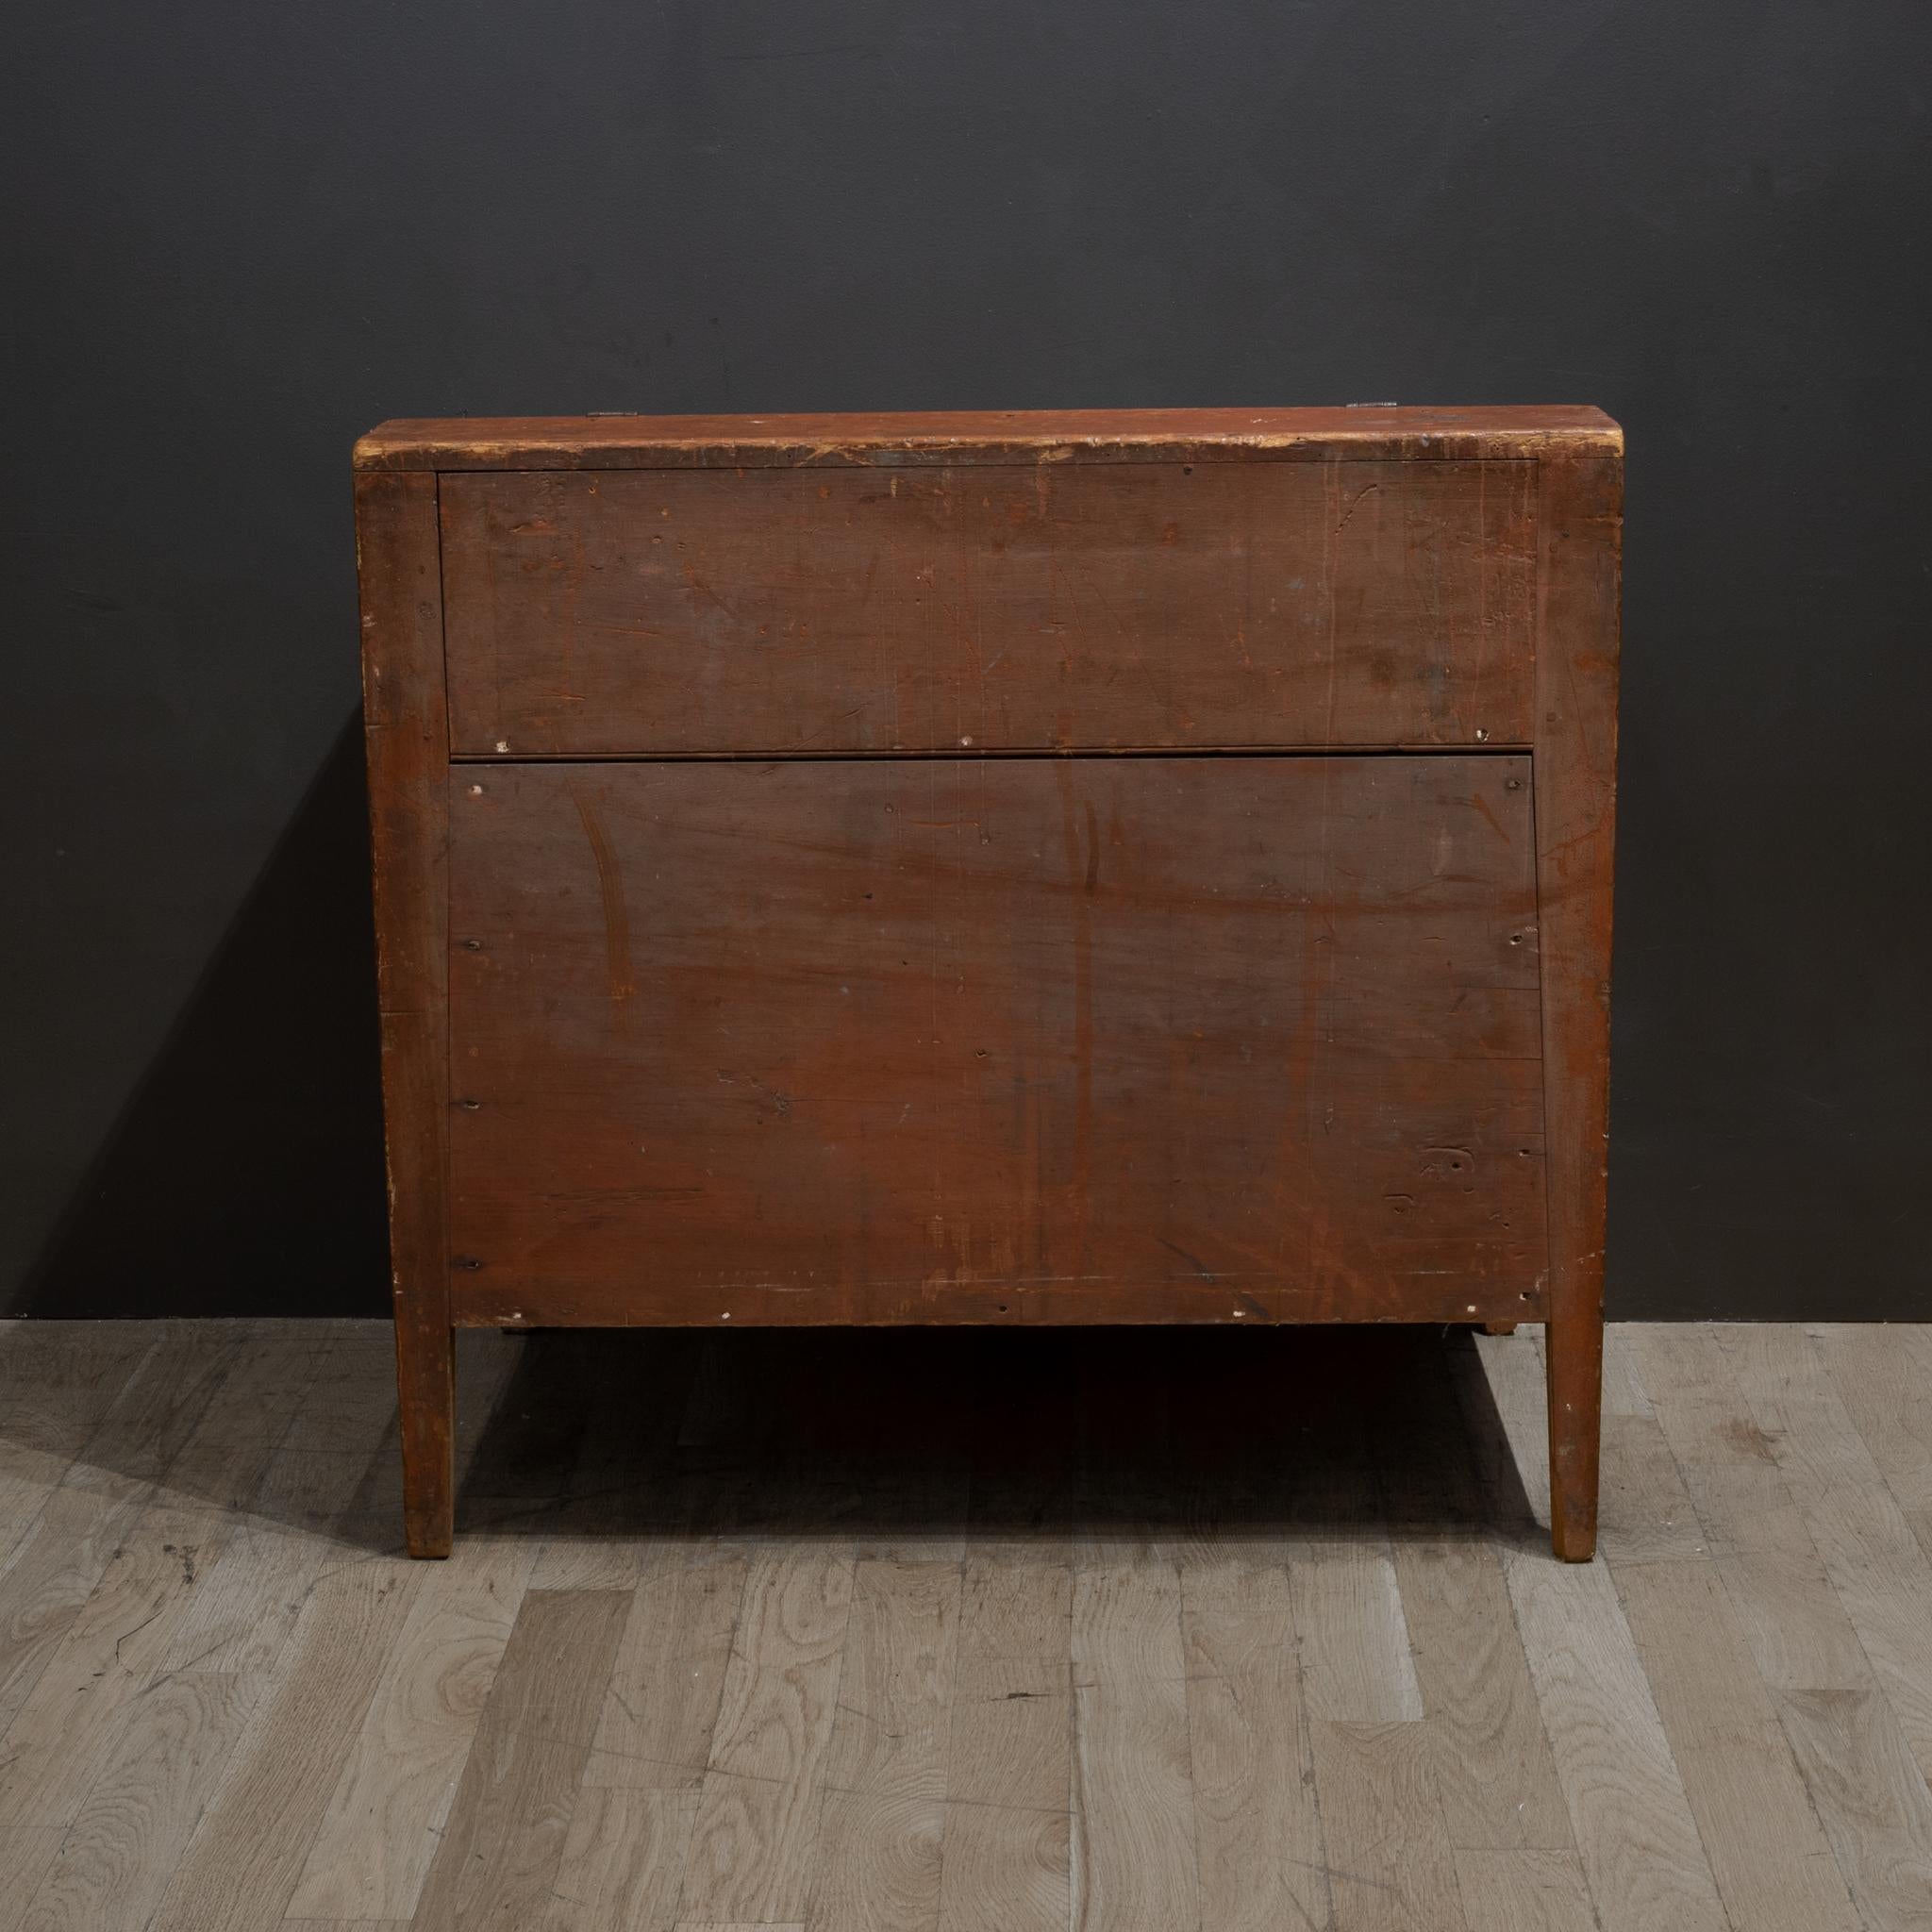 19th Century Early-Mid 19th c. Hand Painted Slant Desk, c.1820-1840 For Sale